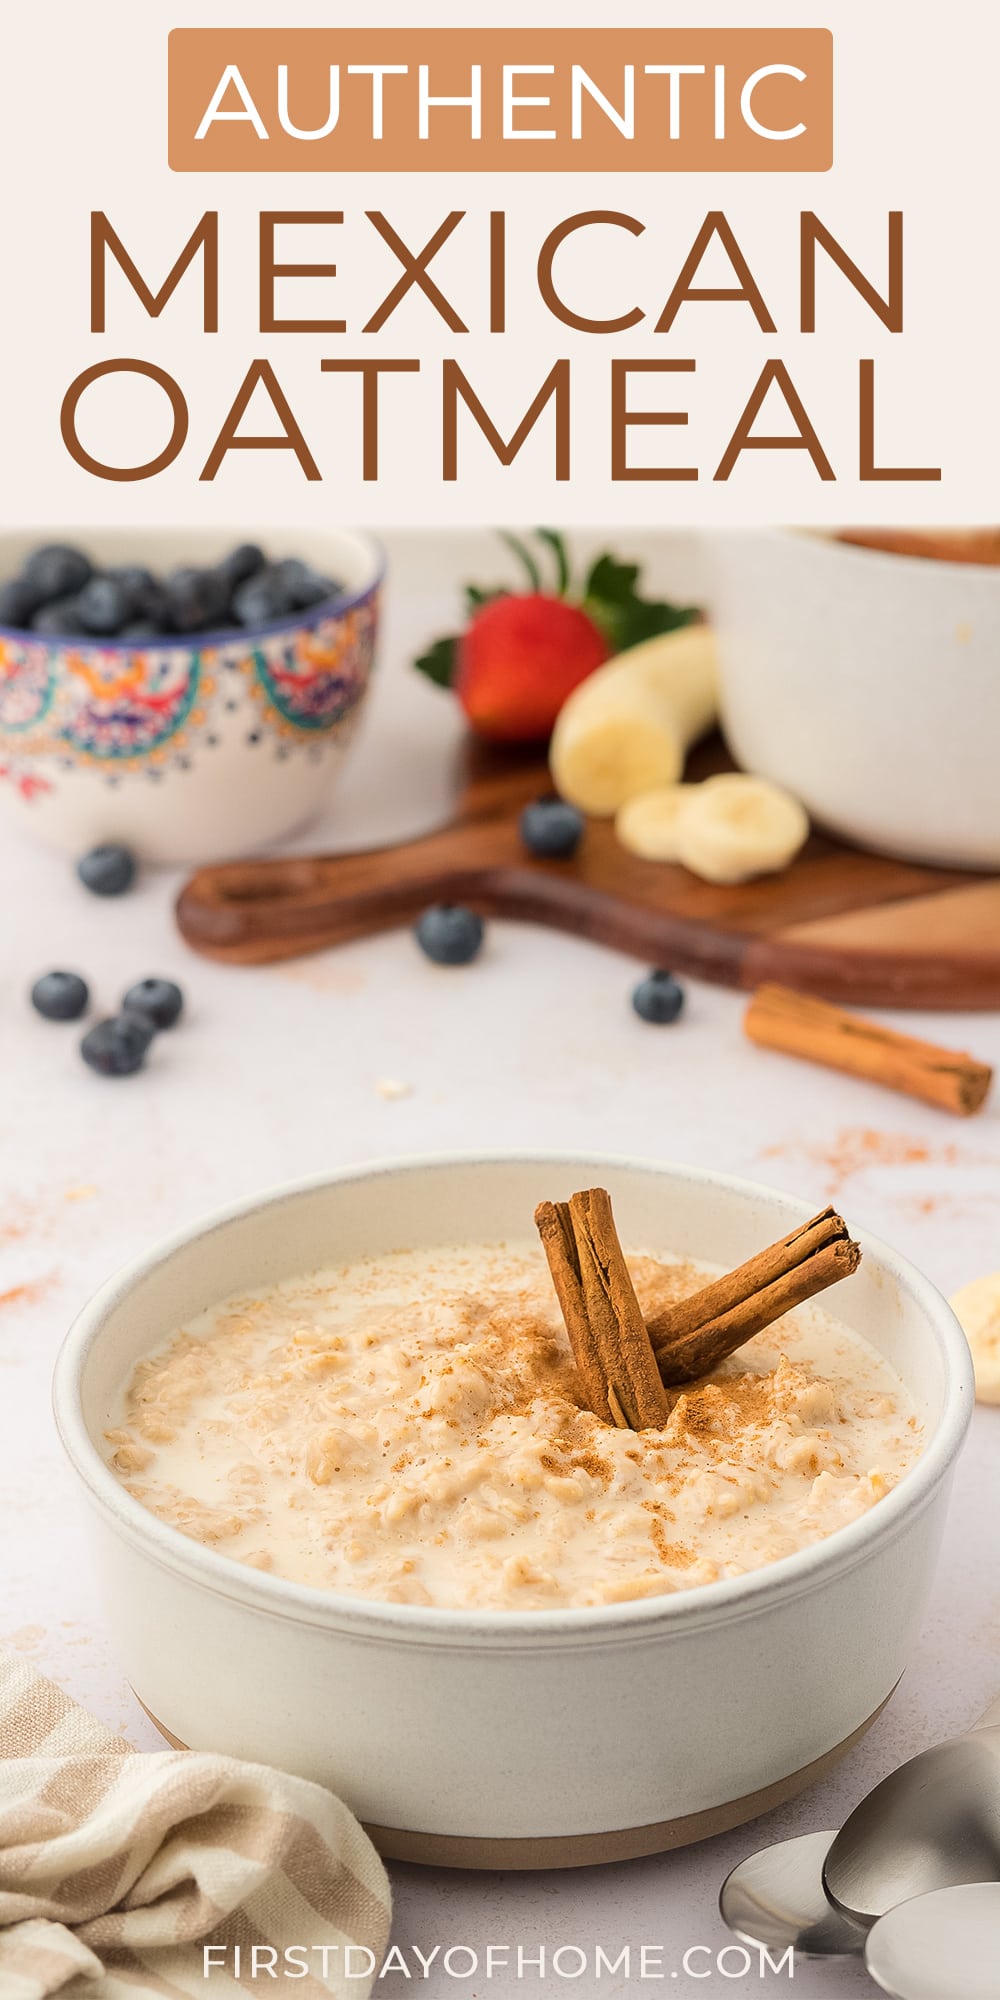 Bowl of Mexican oatmeal (avena) shown with cinnamon sticks and fruit in the background.